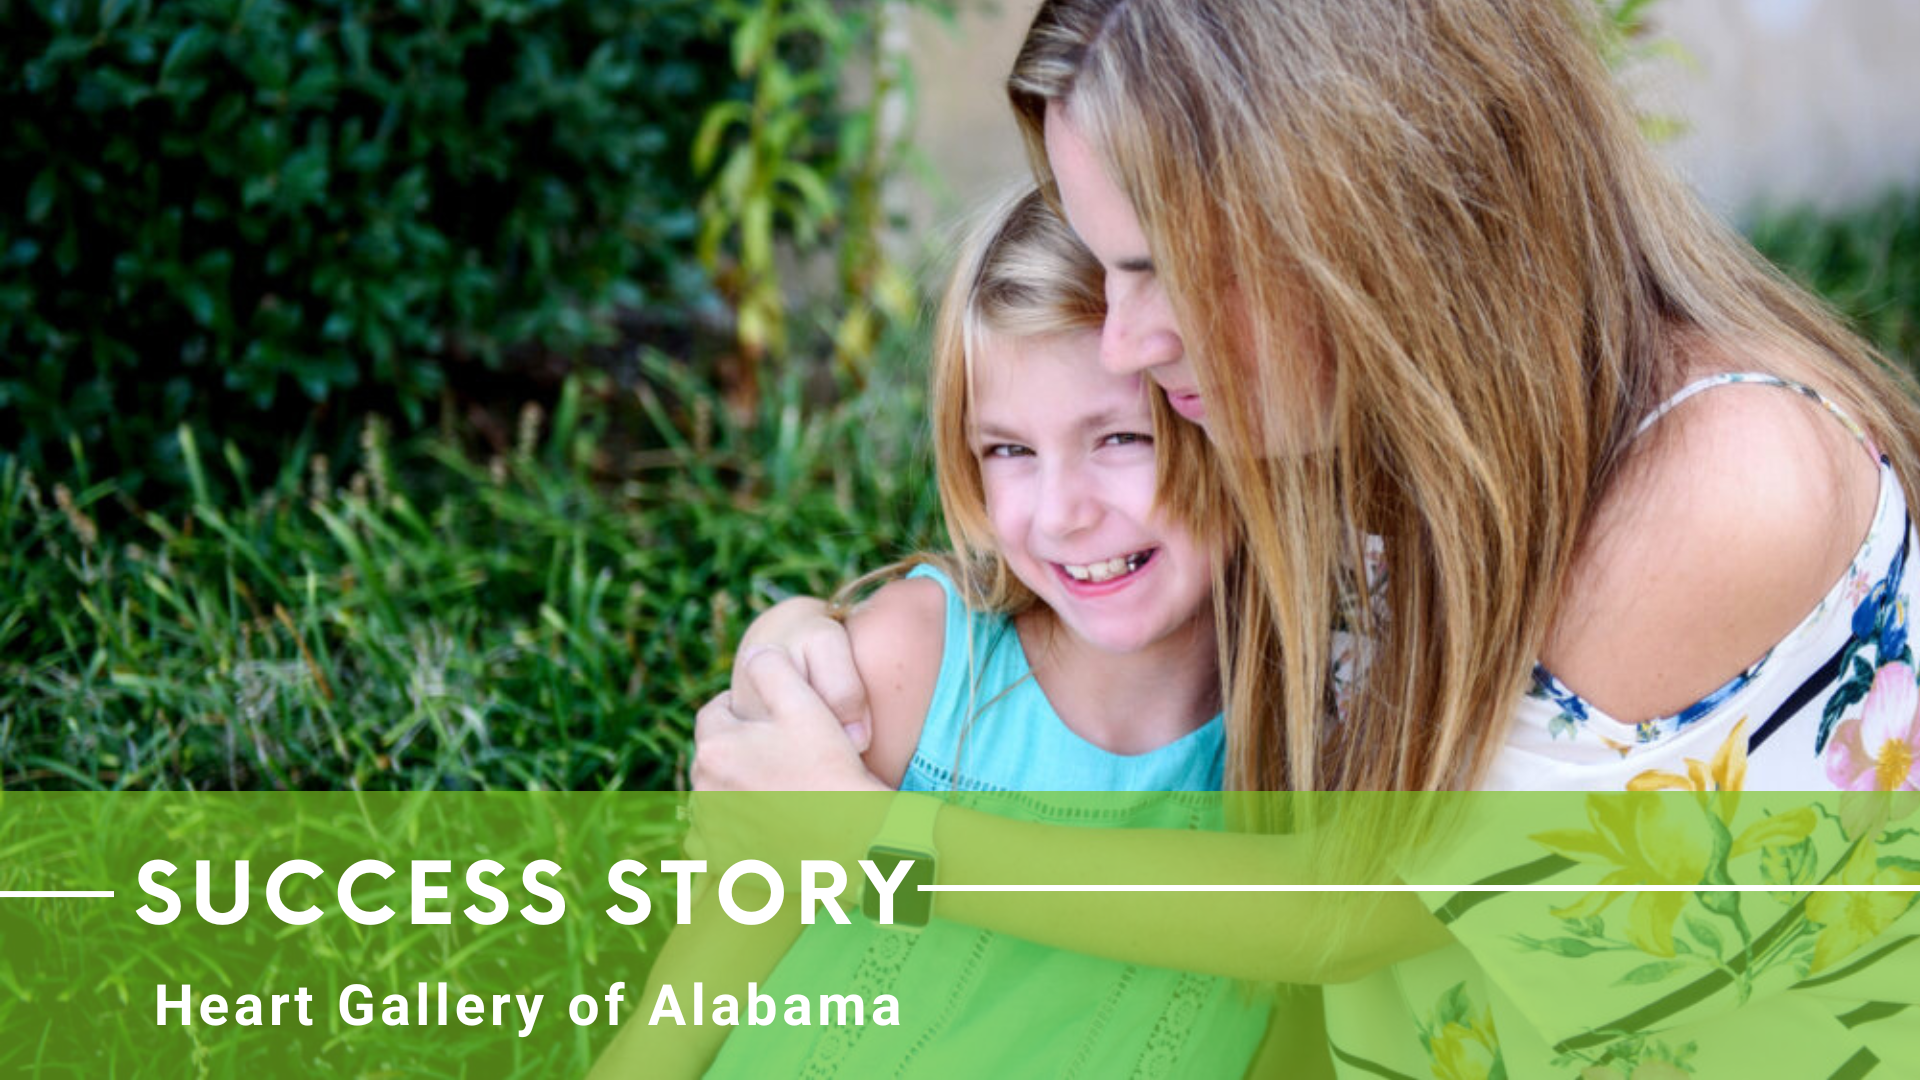 Capturing Hope: Heart Gallery Alabama Partners with ClickBid